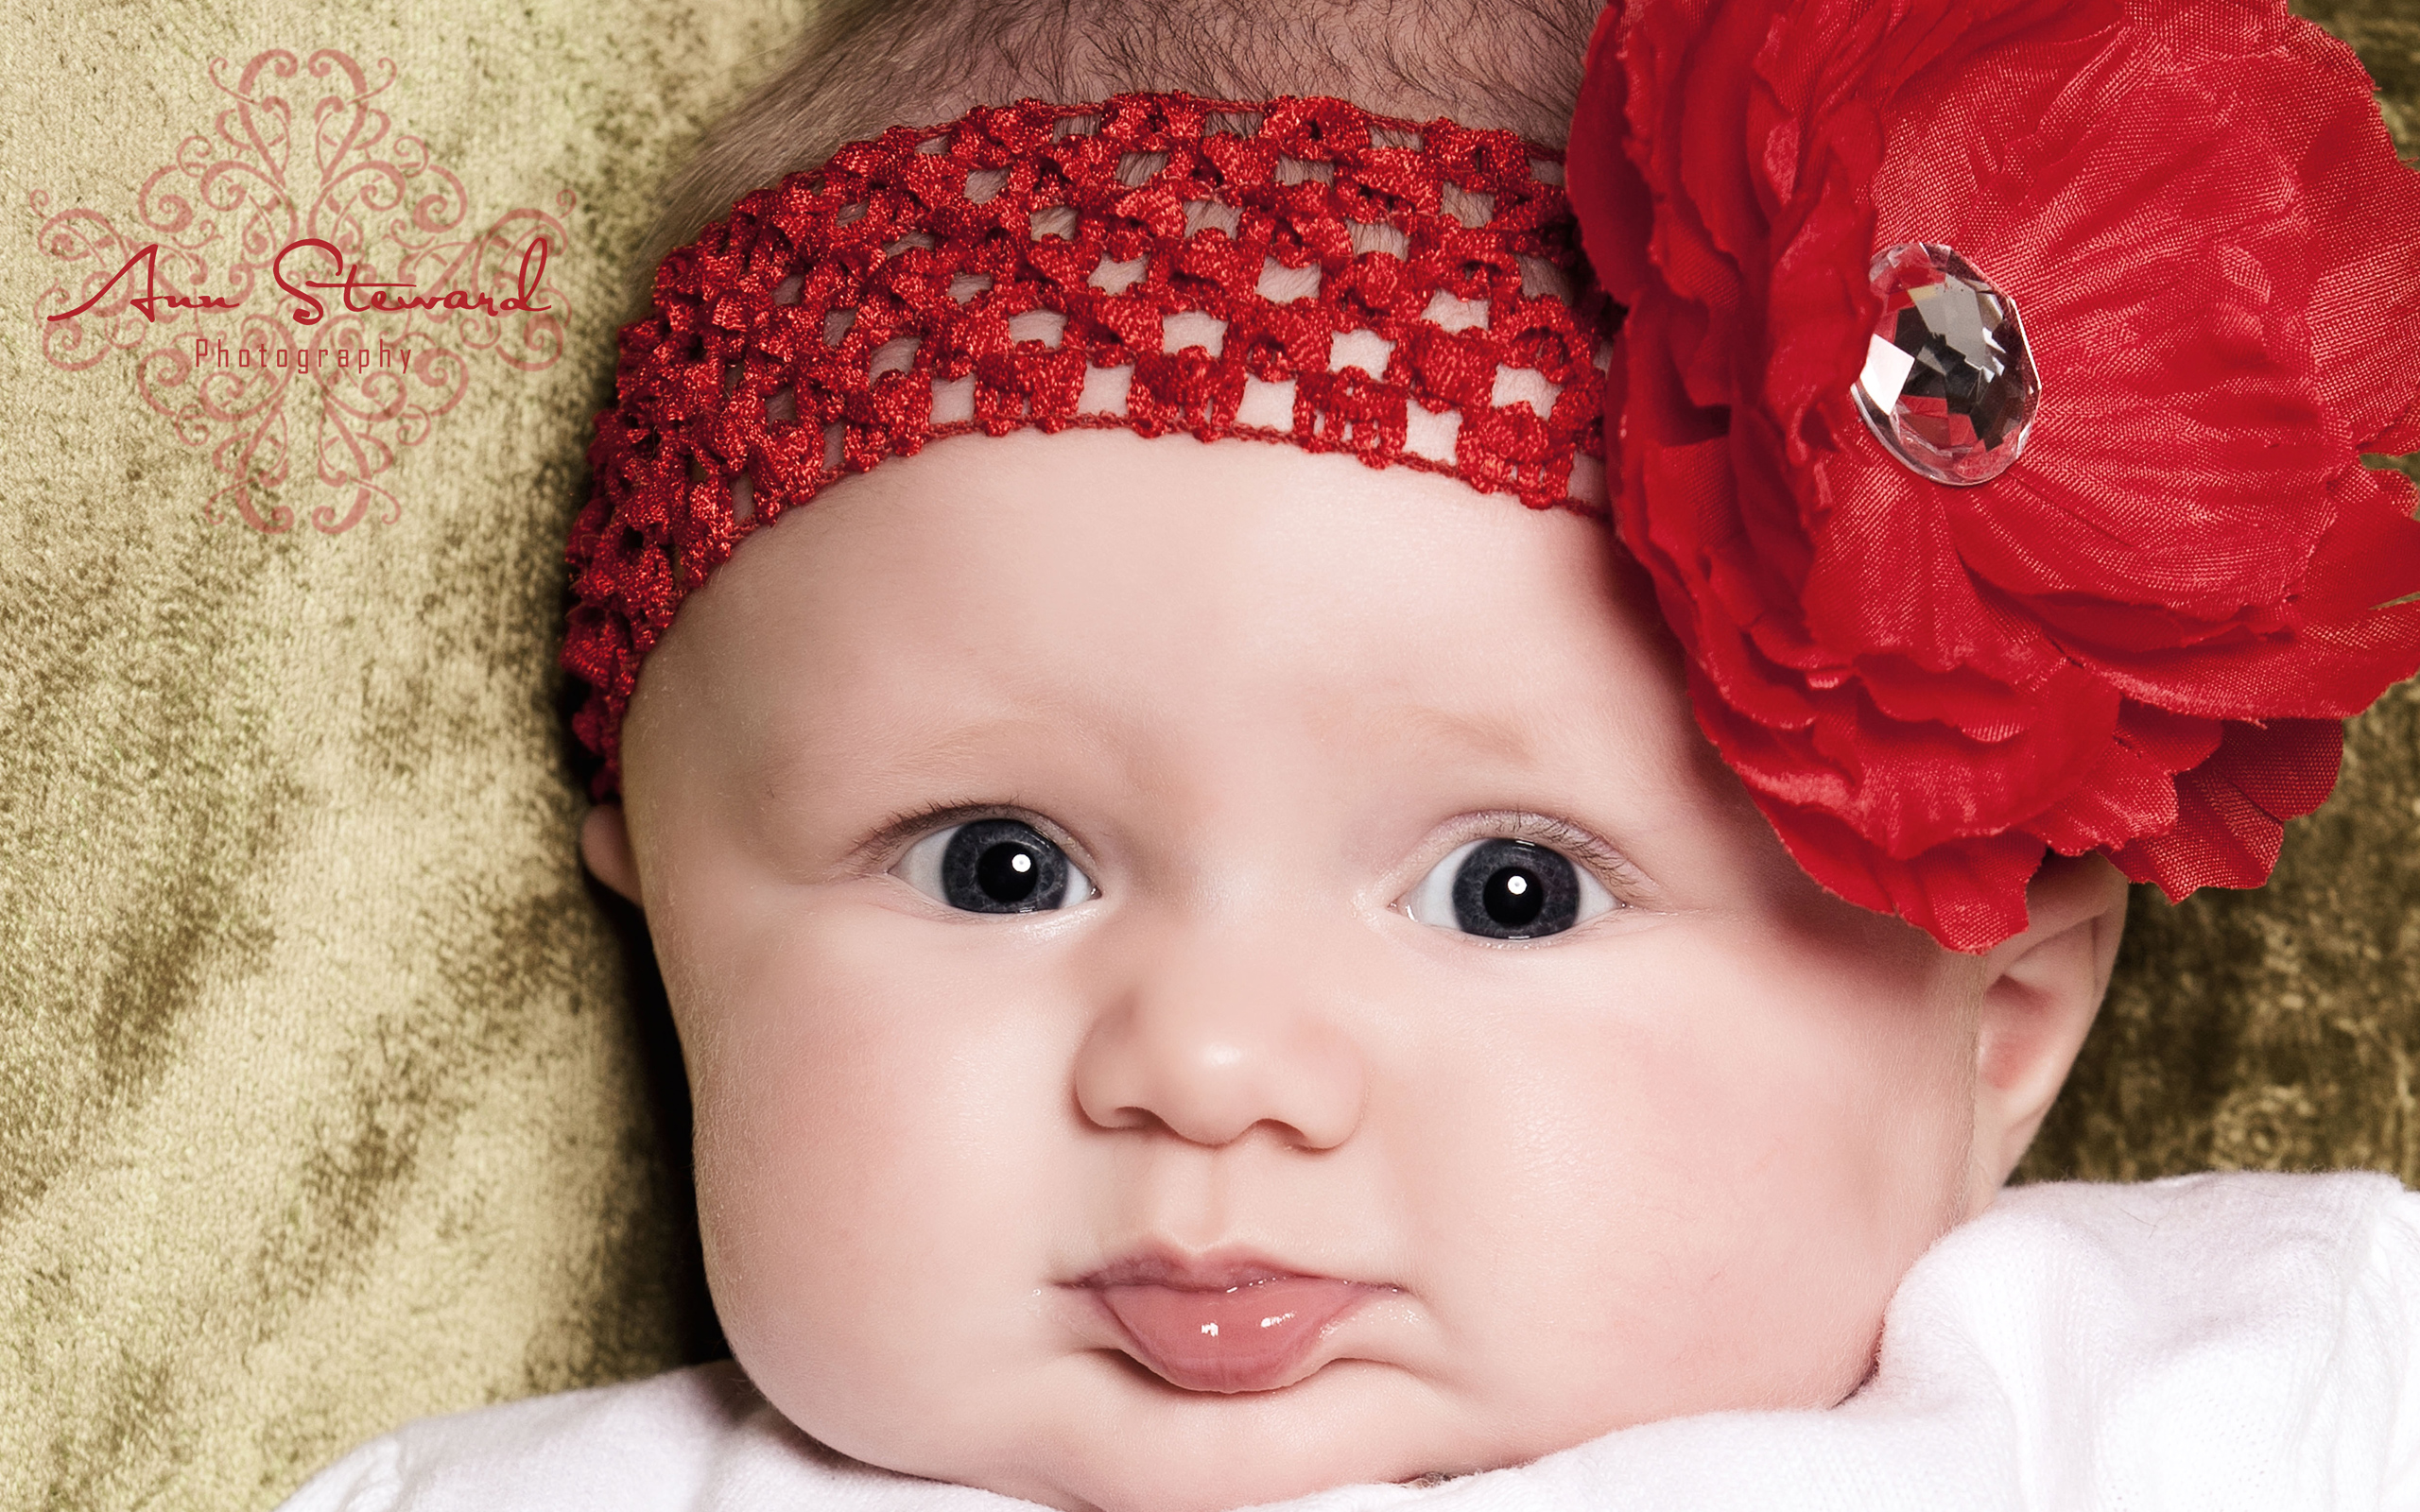 Wallpaper Of Super Baby A Cute With Big Red Flower On Th Head